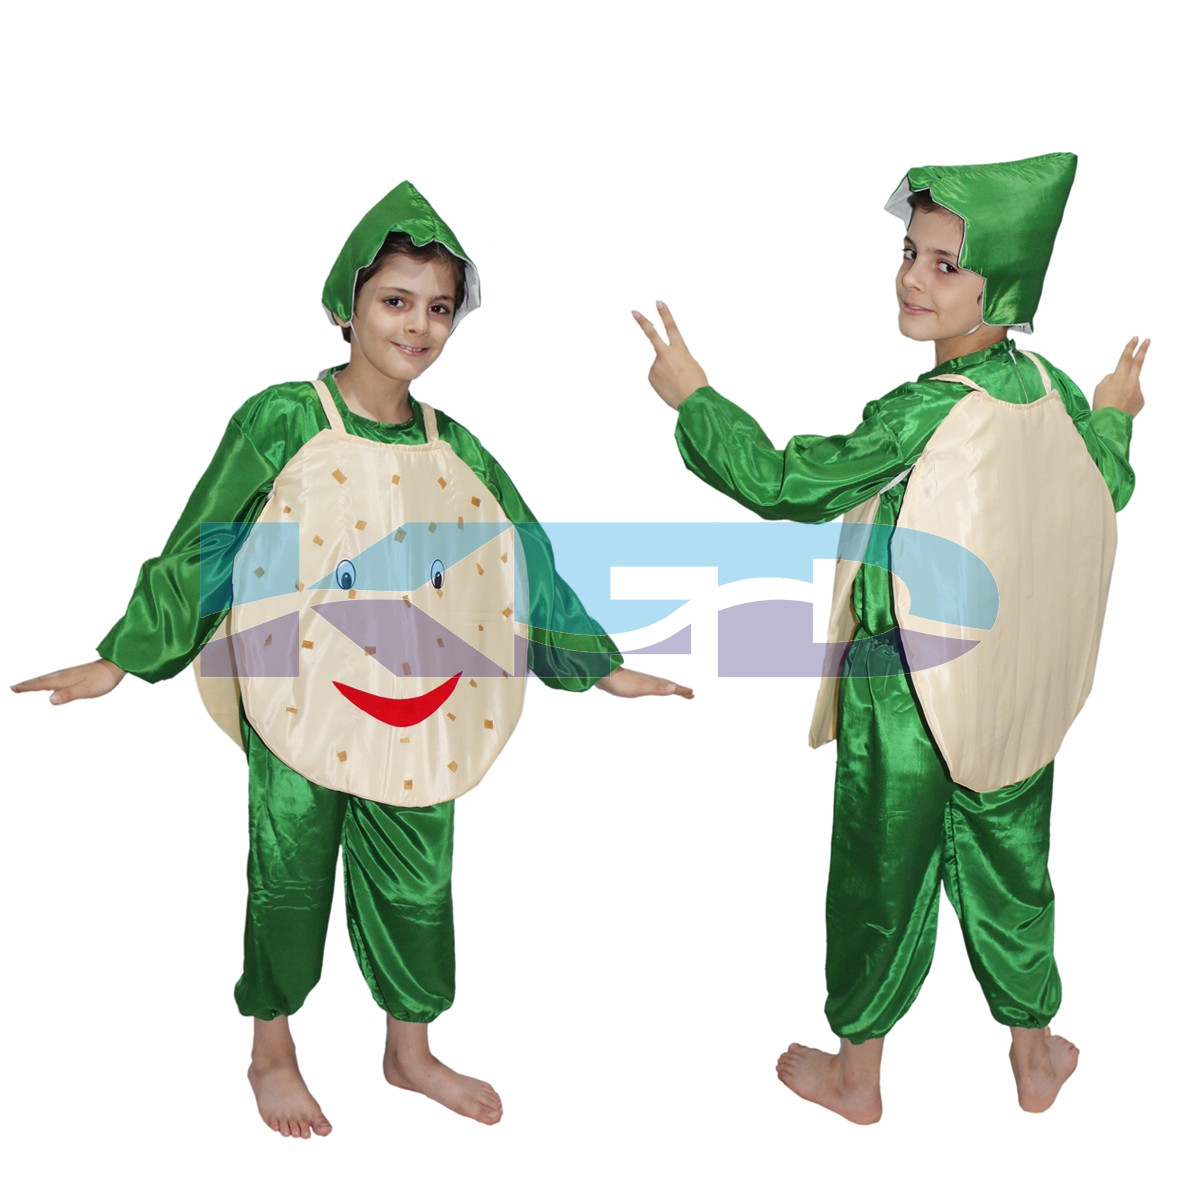 Potato fancy dress for kids,Vegetables Costume for School Annual function/Theme Party/Competition/Stage Shows Dress